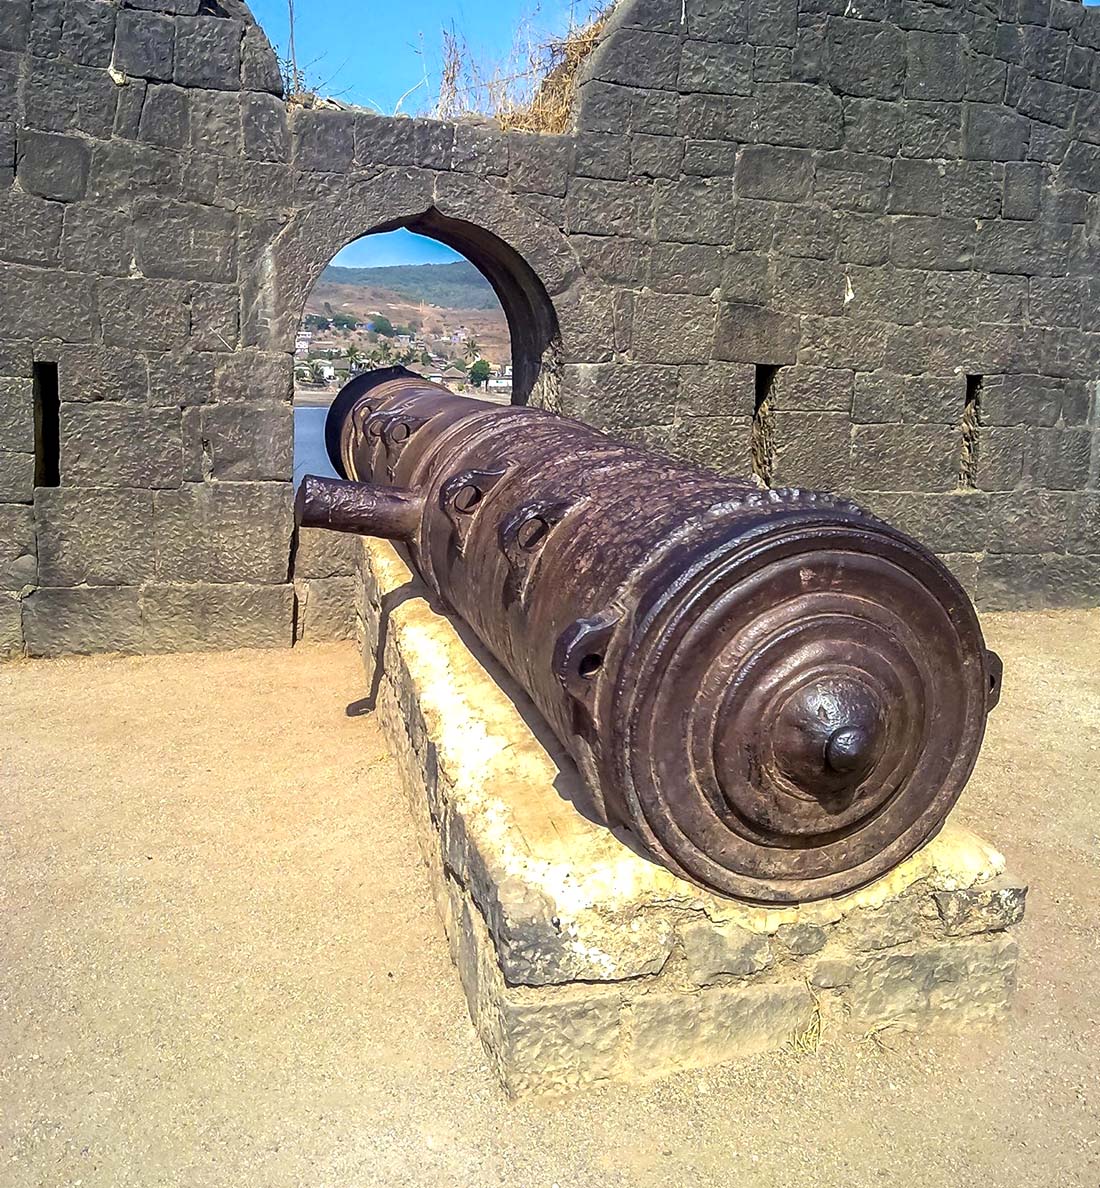 Kalak Bangdi- the third largest cannon of India, stationed at Janjira Fort. Image Source: Wikimedia Commons.